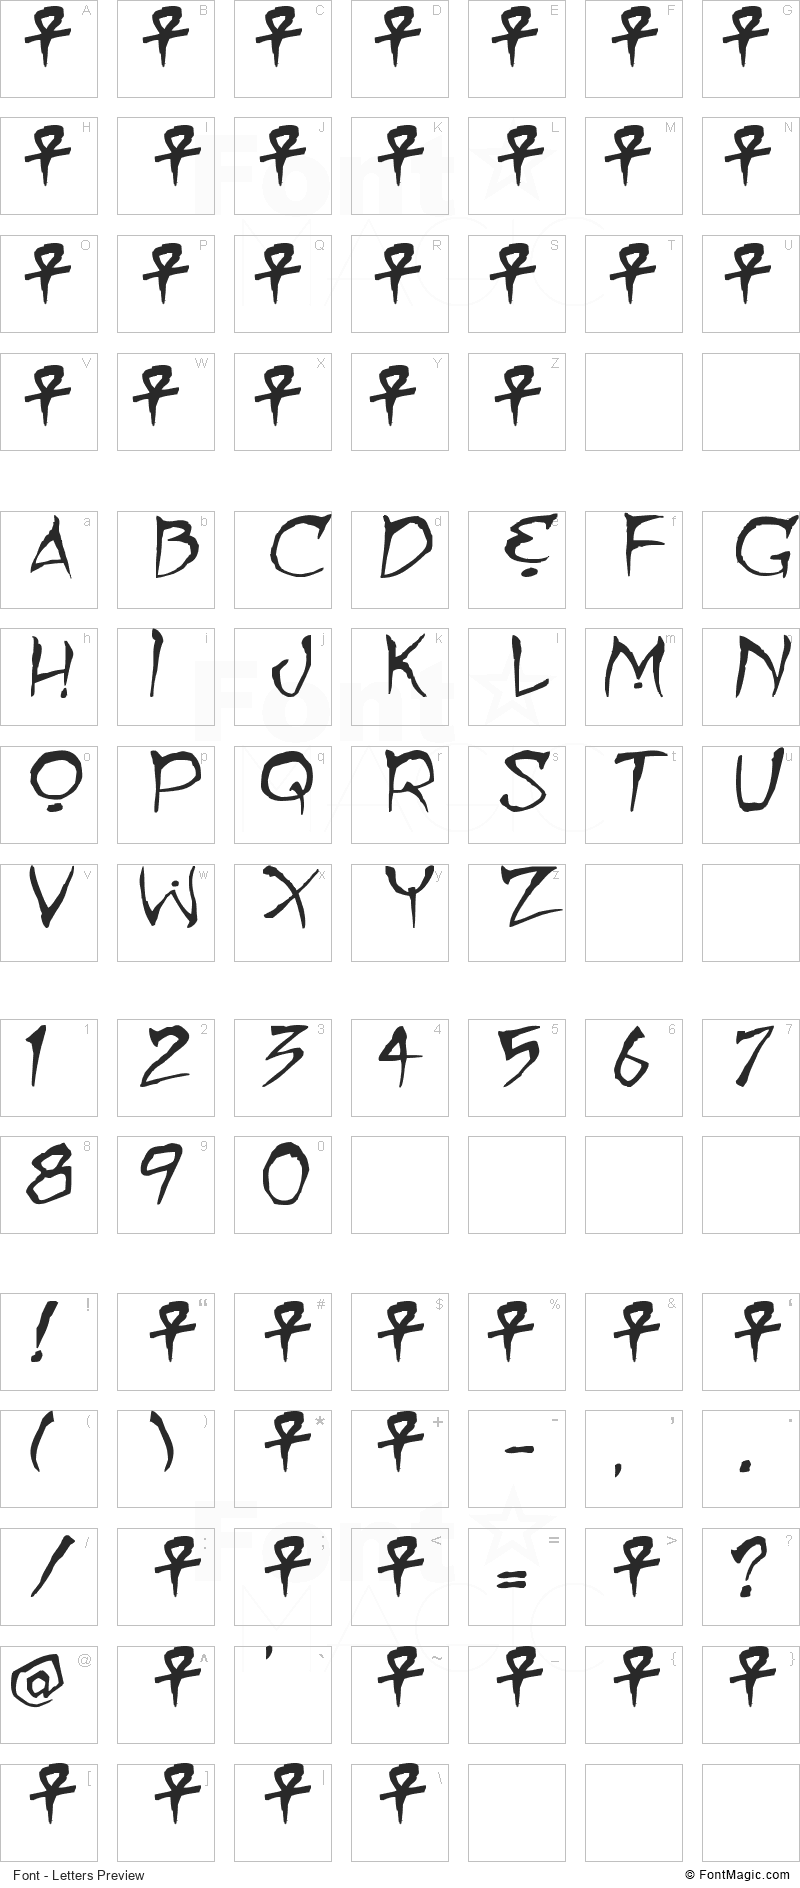 Mummy loves you Font - All Latters Preview Chart